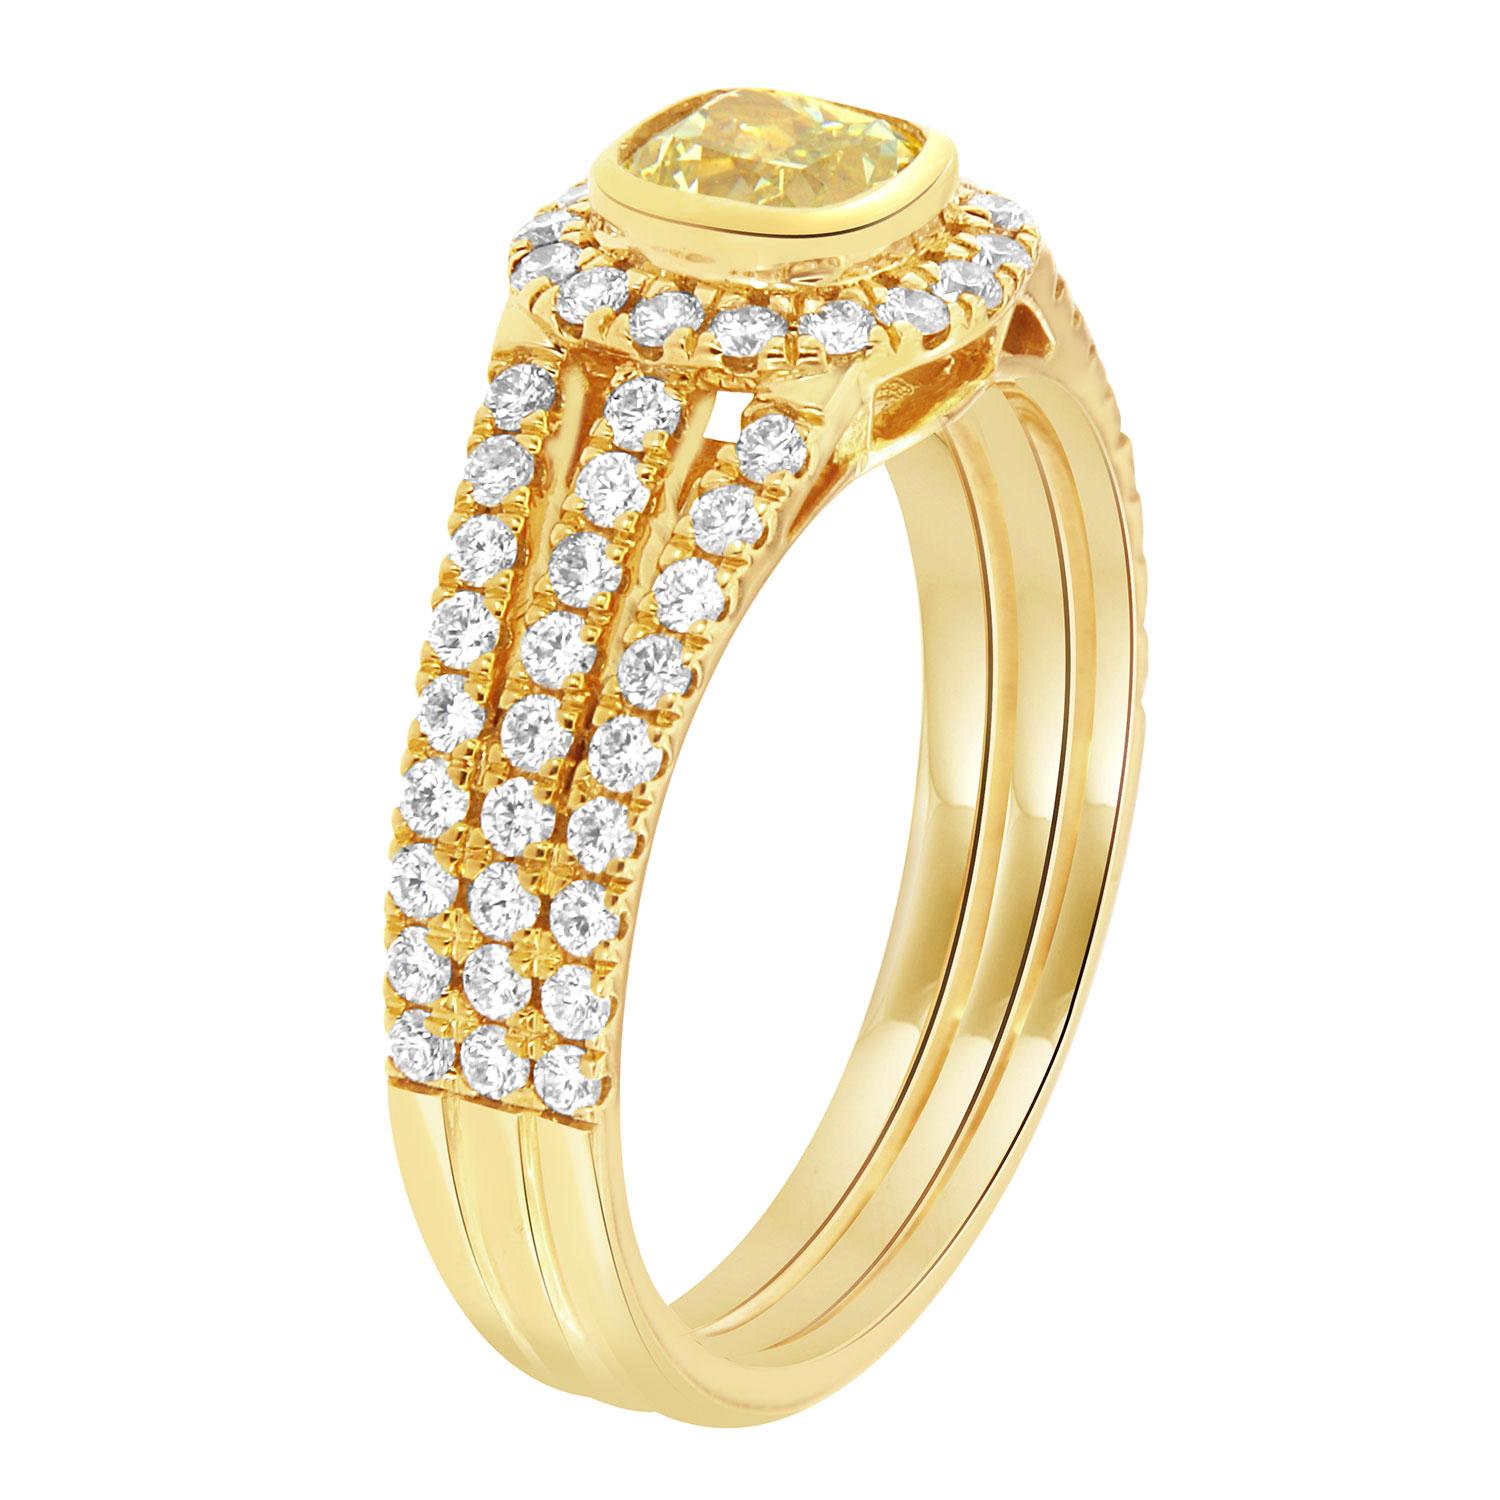 This delicate ring features a 0.62-carat square cushion shape natural yellow diamond bezel set. A halo of brilliant round diamonds encircles the Yellow diamond. Three thin rows of brilliant round diamonds micro prong set on 50% of this split shank